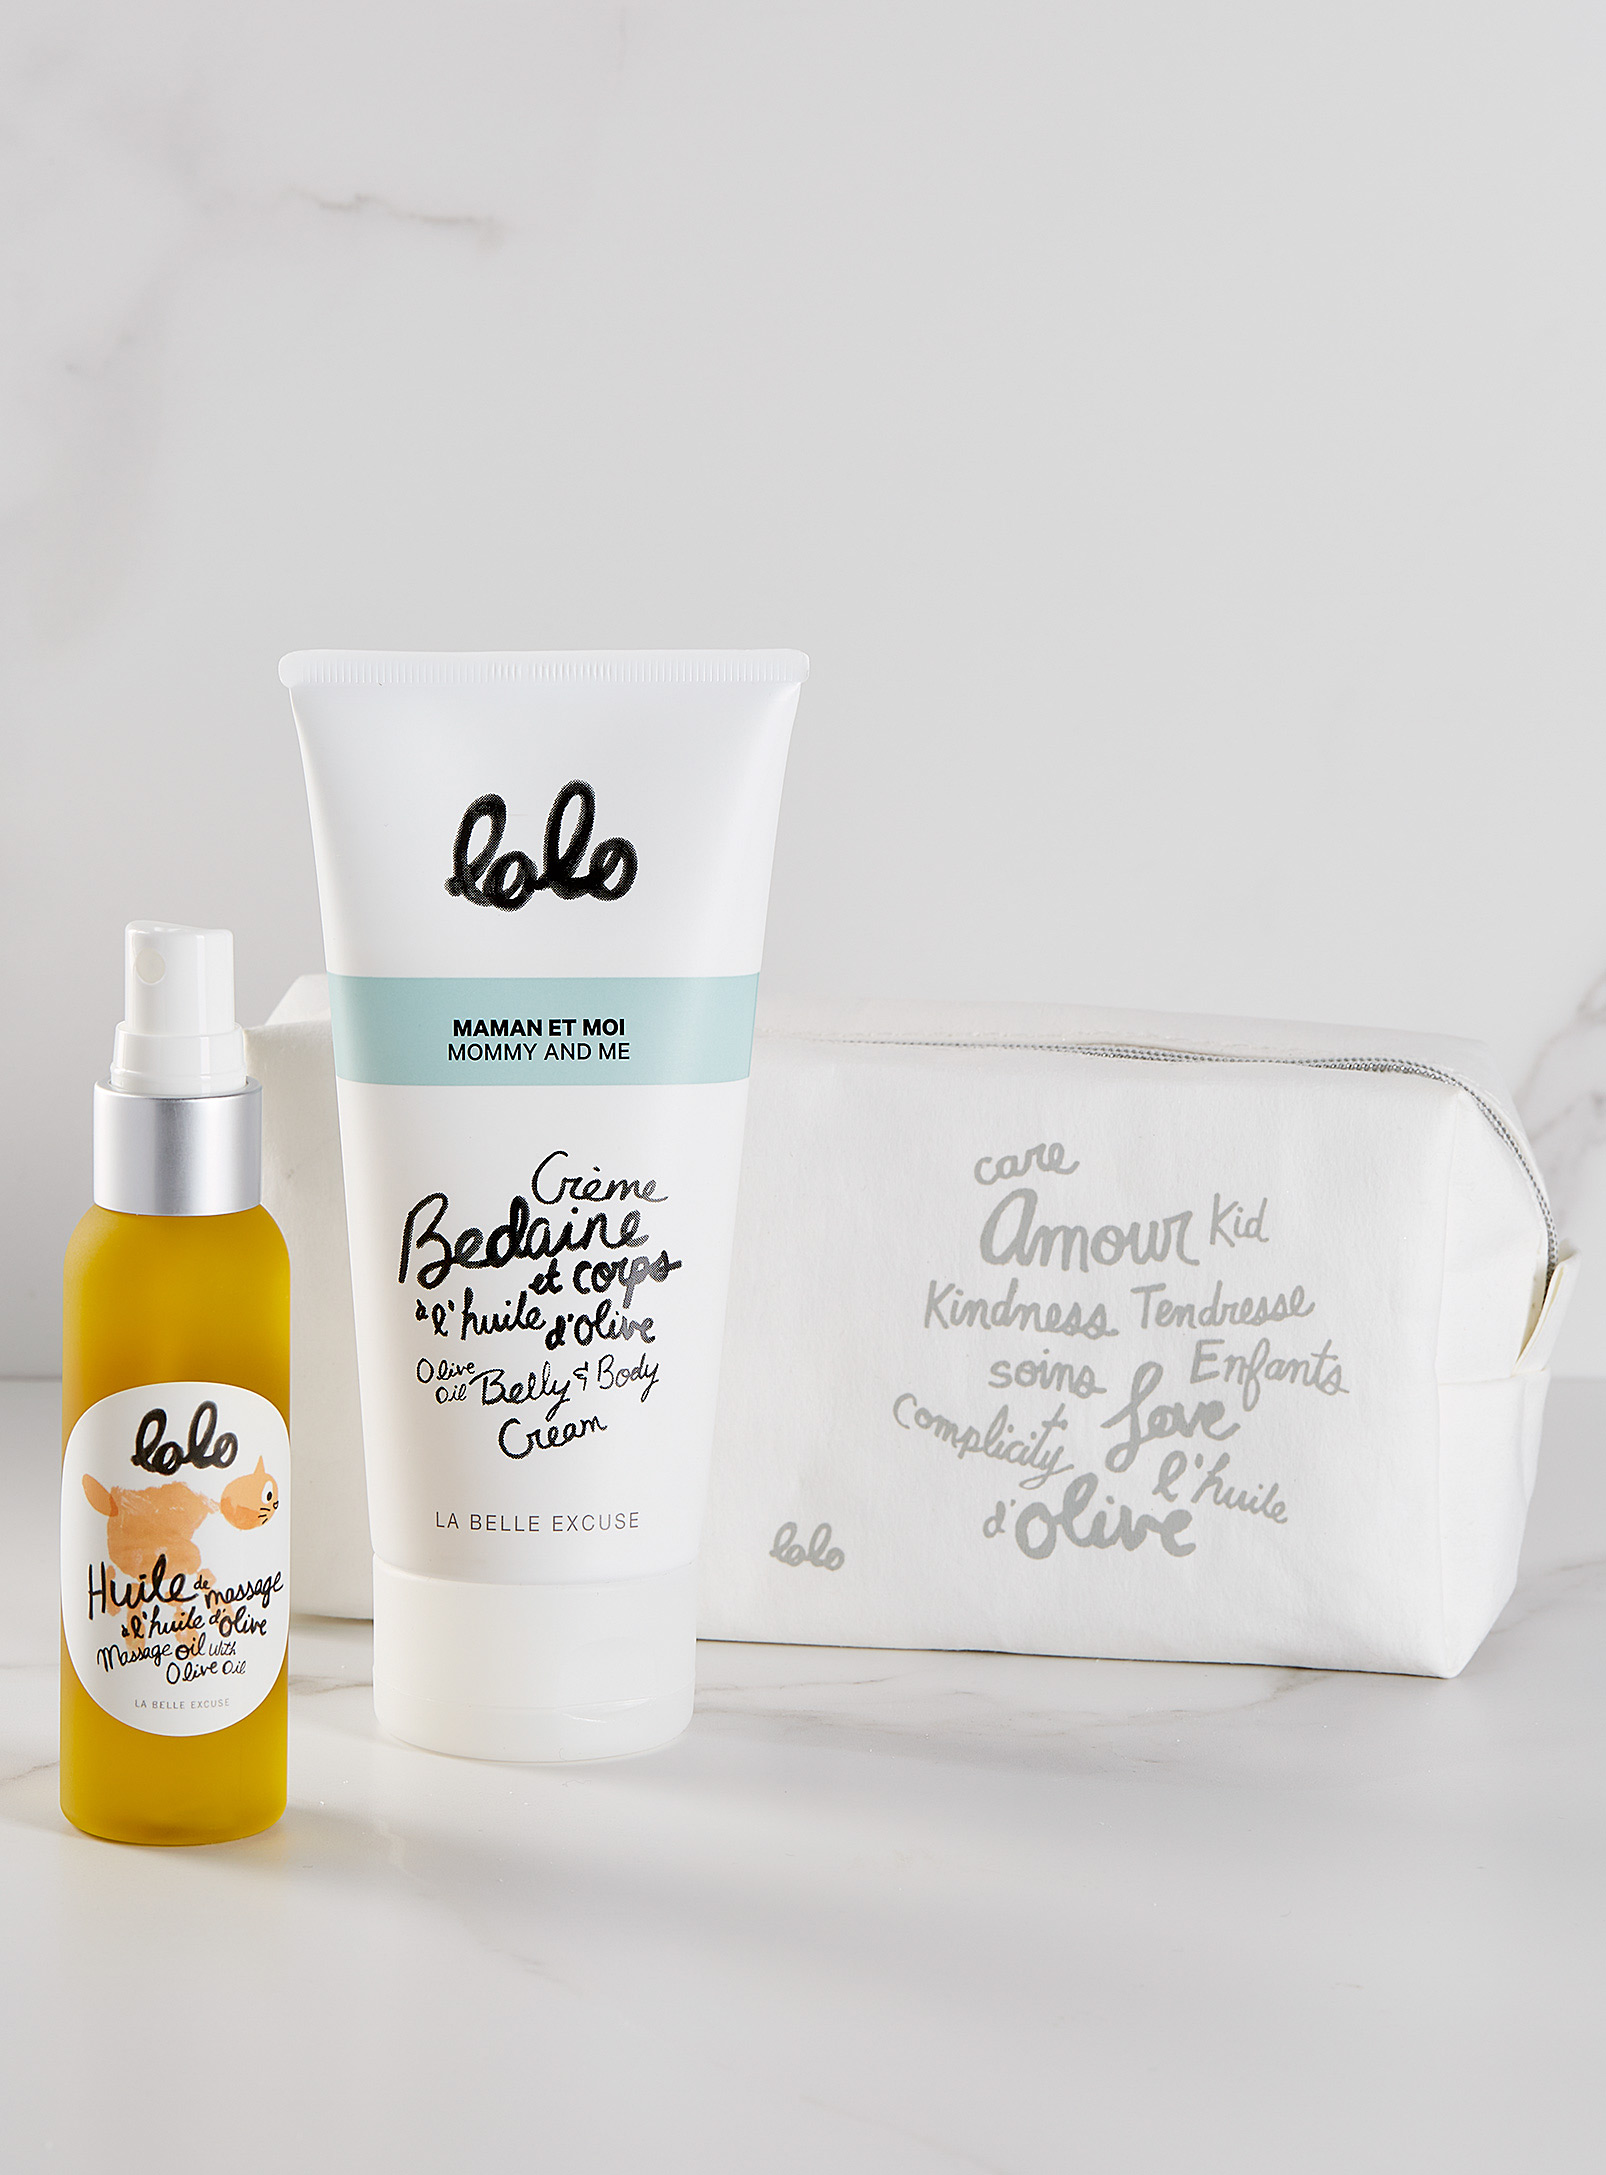 La Belle Excuse - Lolo waiting for the stork skincare set